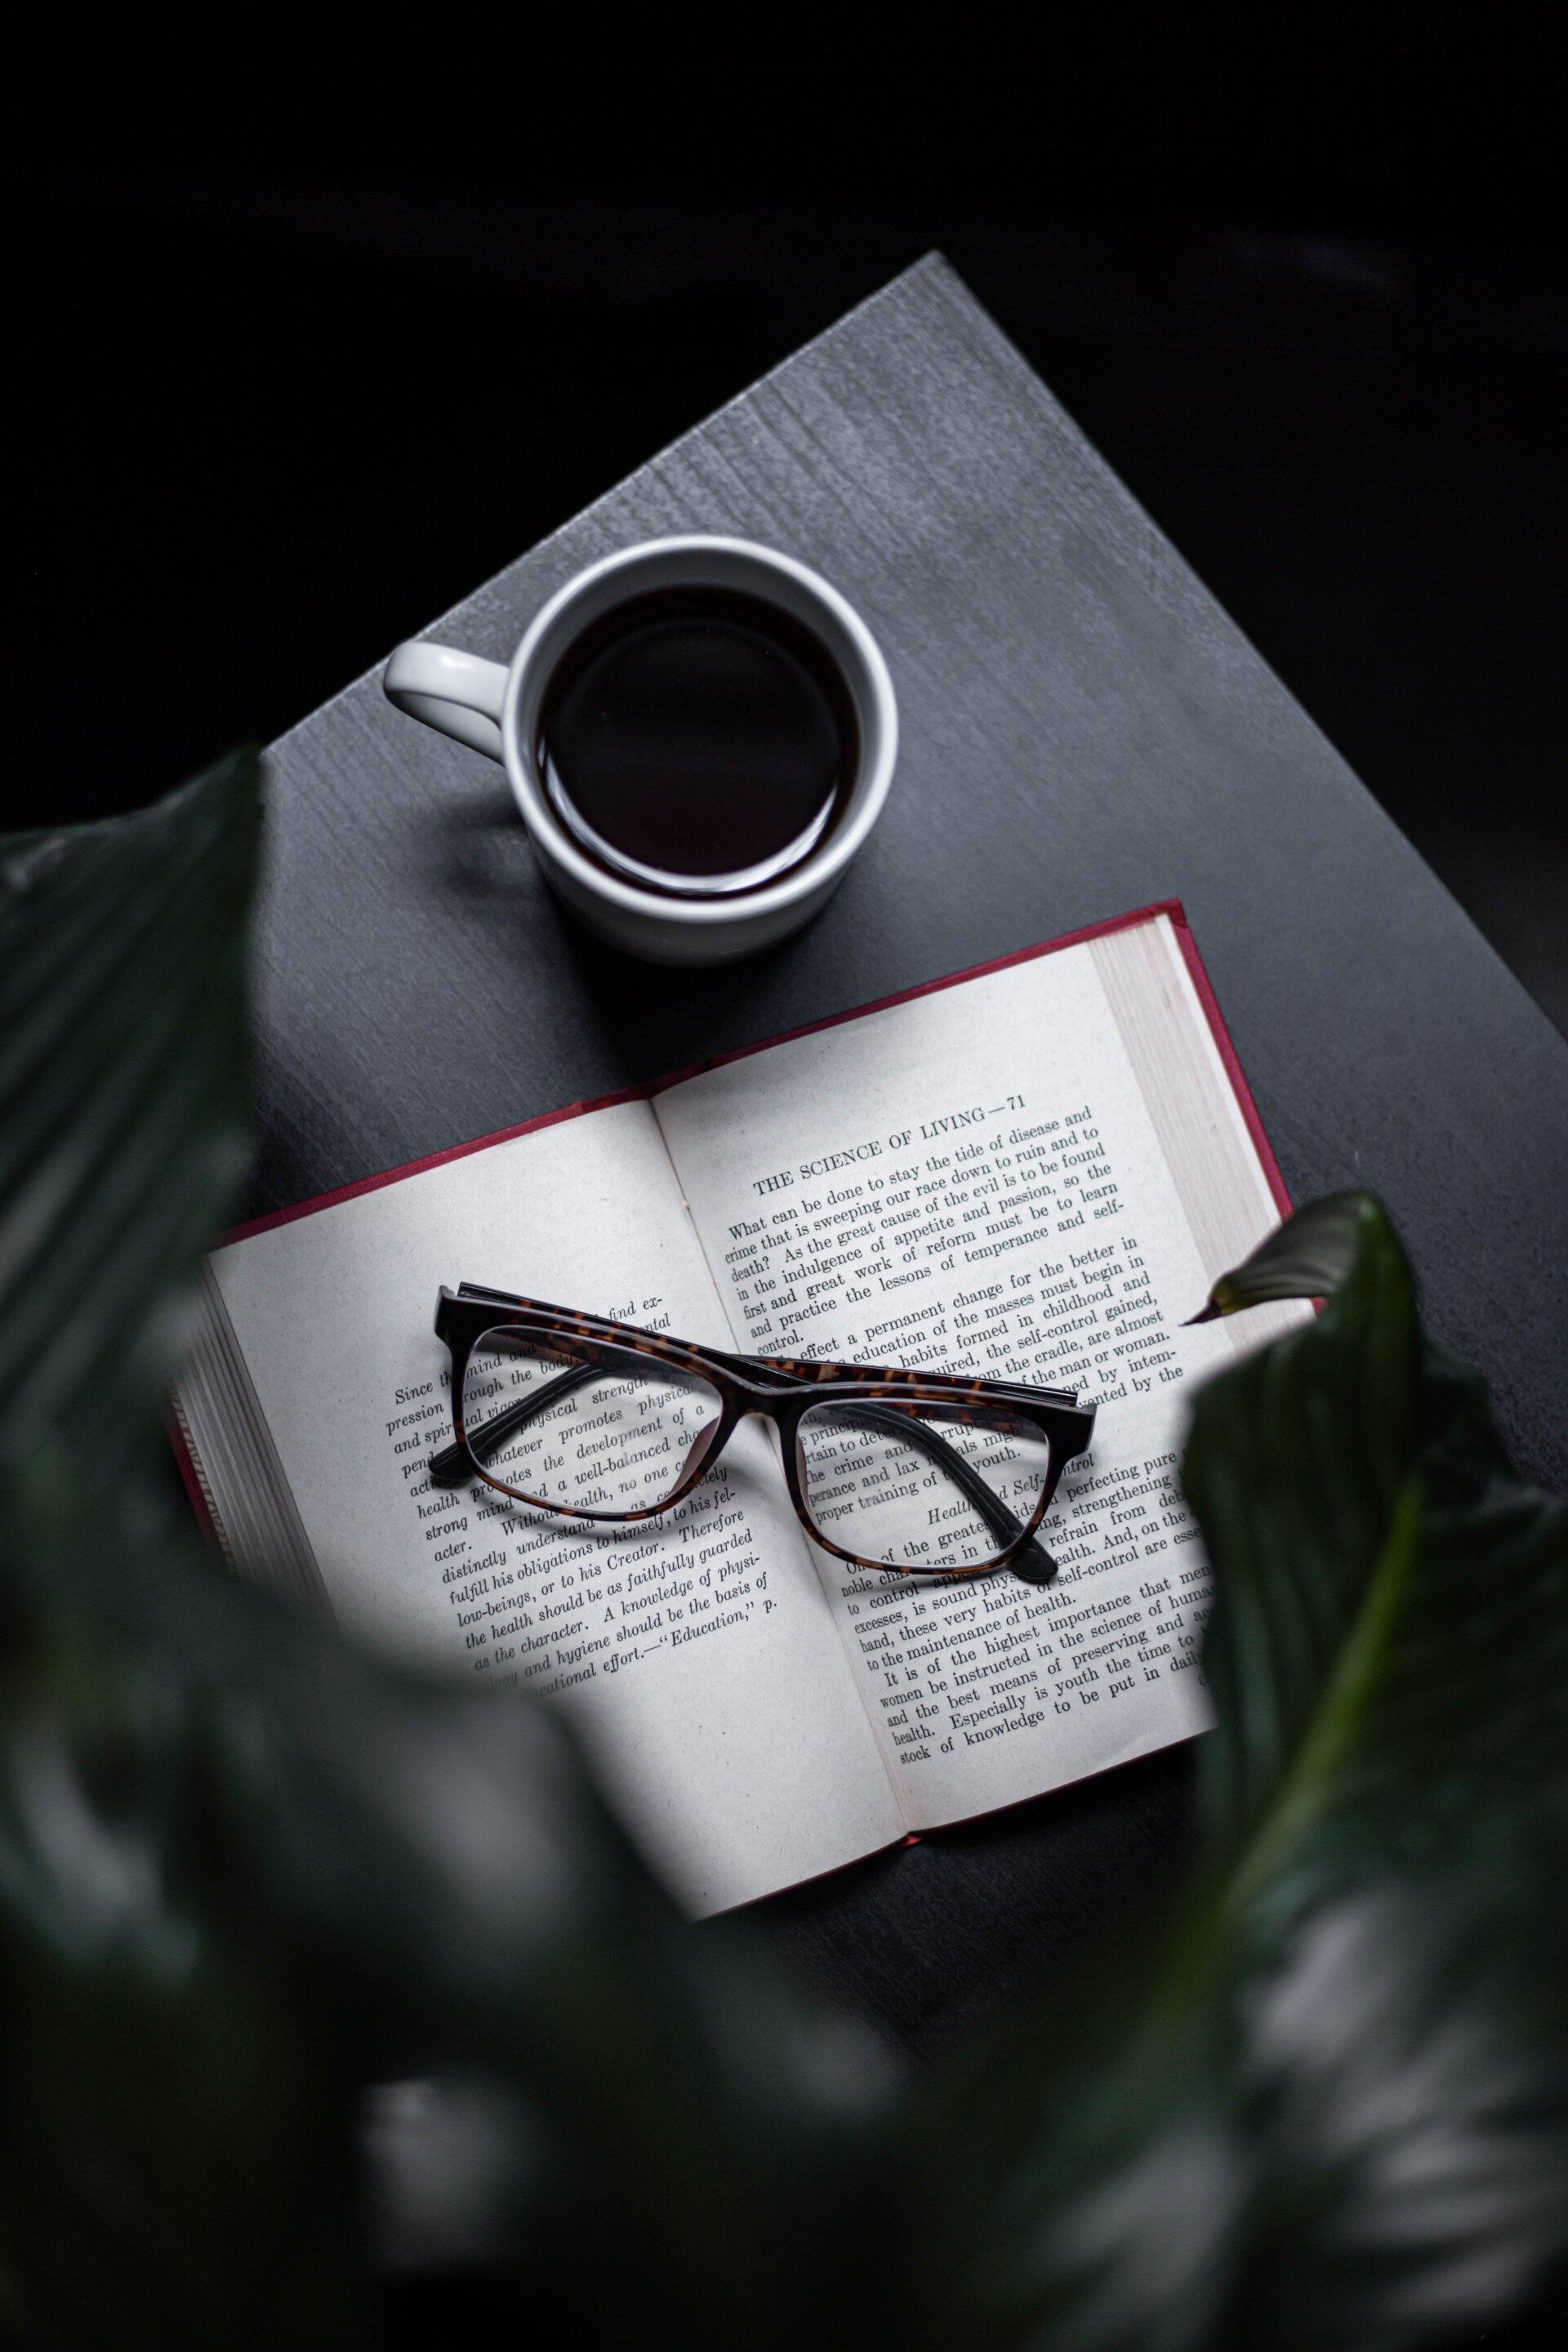 A pair of glasses sits on top of an open book next to a cup of coffee.